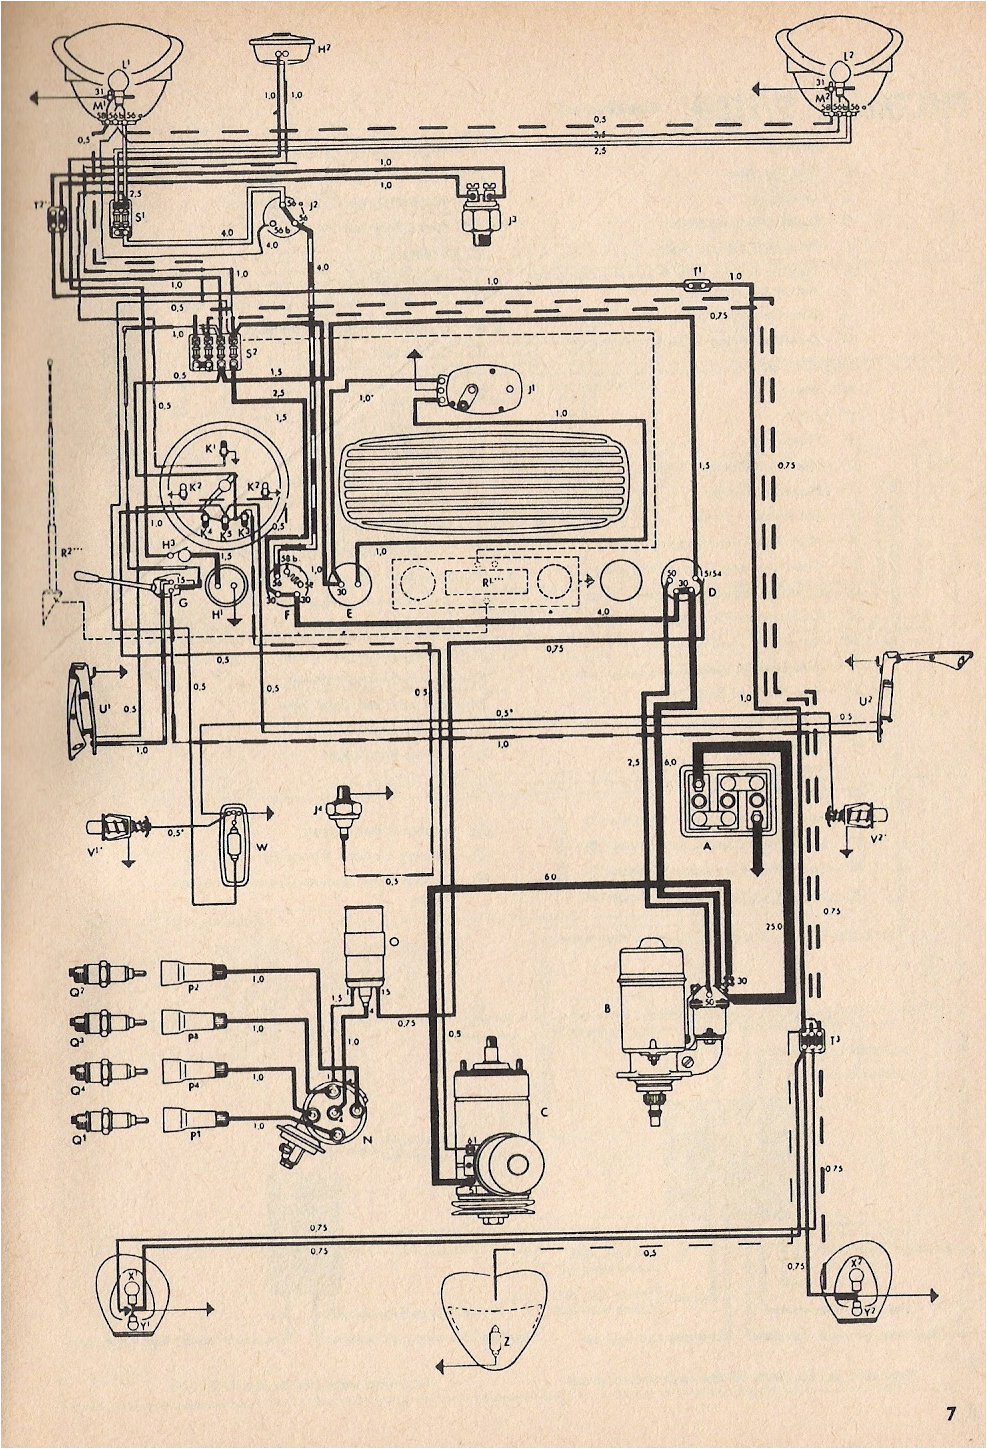 1966 beetle wire harness routing wiring diagram used 1970 vw bug turn signal wiring thesamba com